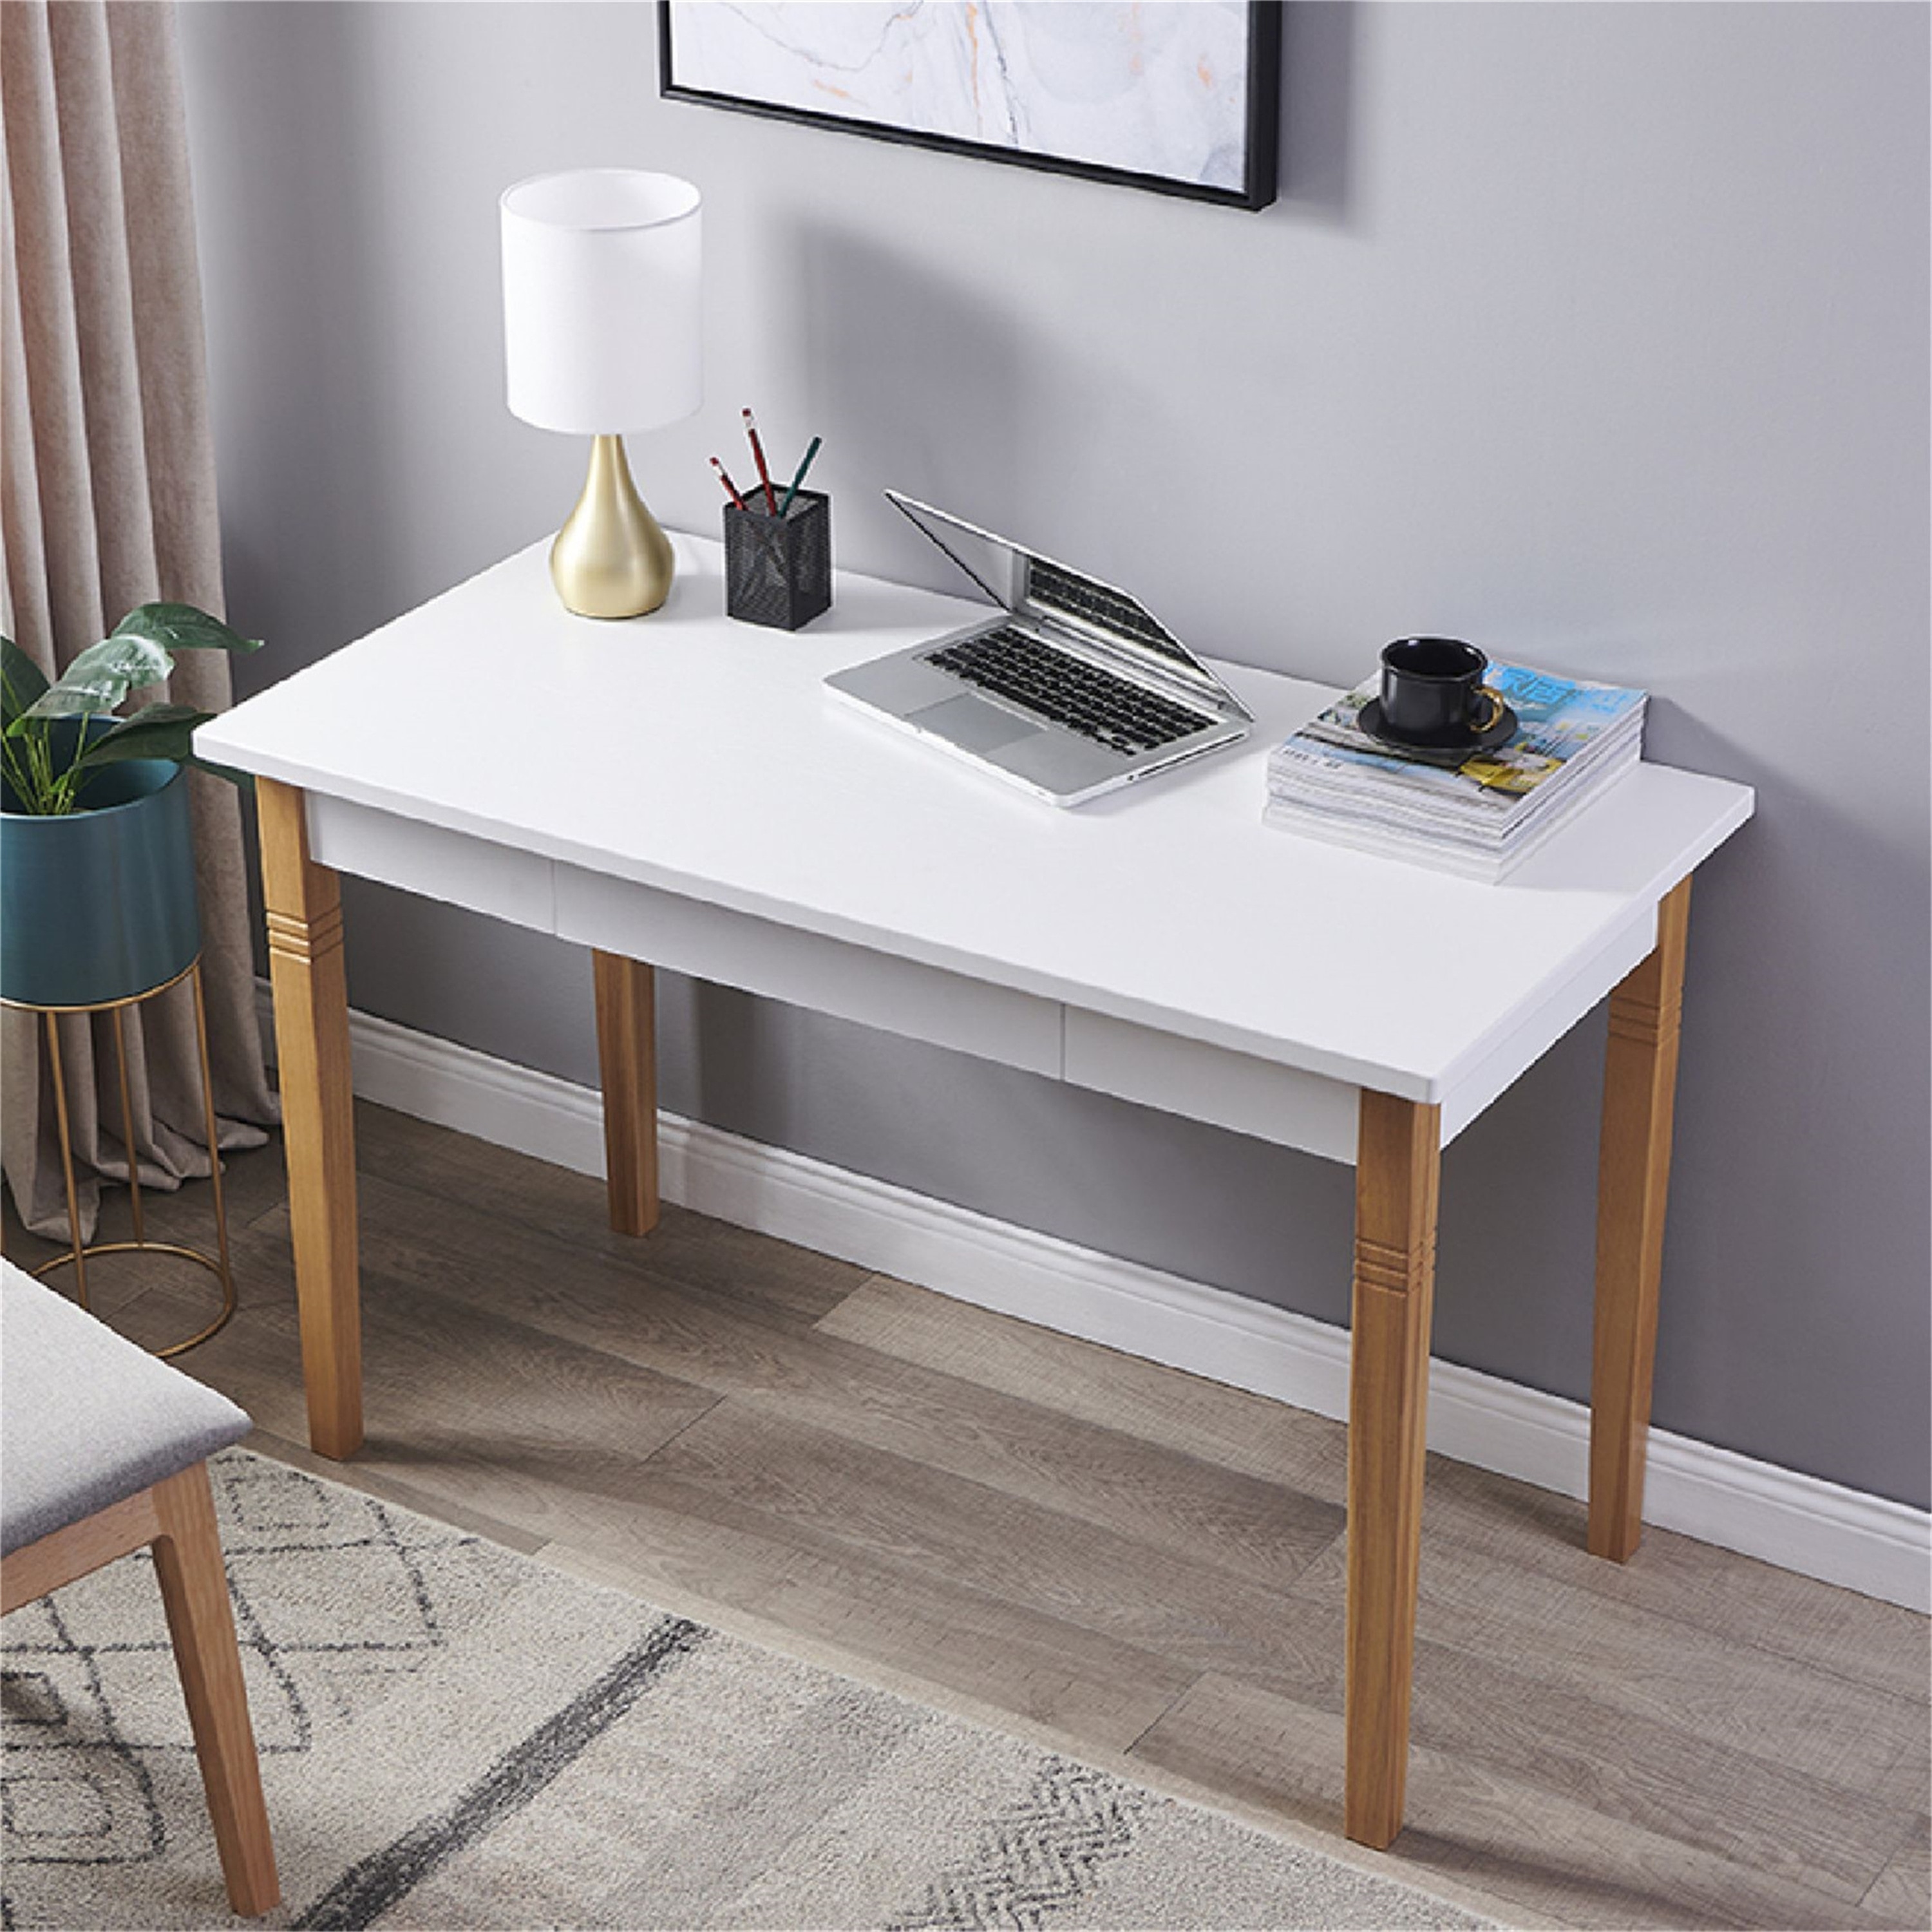 https://ak1.ostkcdn.com/images/products/is/images/direct/2a4d9e96130b8fcb4fcea515999b9e3ea6193b1c/Simple-Solid-Wood-Straight-Leg-Desk-With-Drawer-For-Office-Home---White.jpg